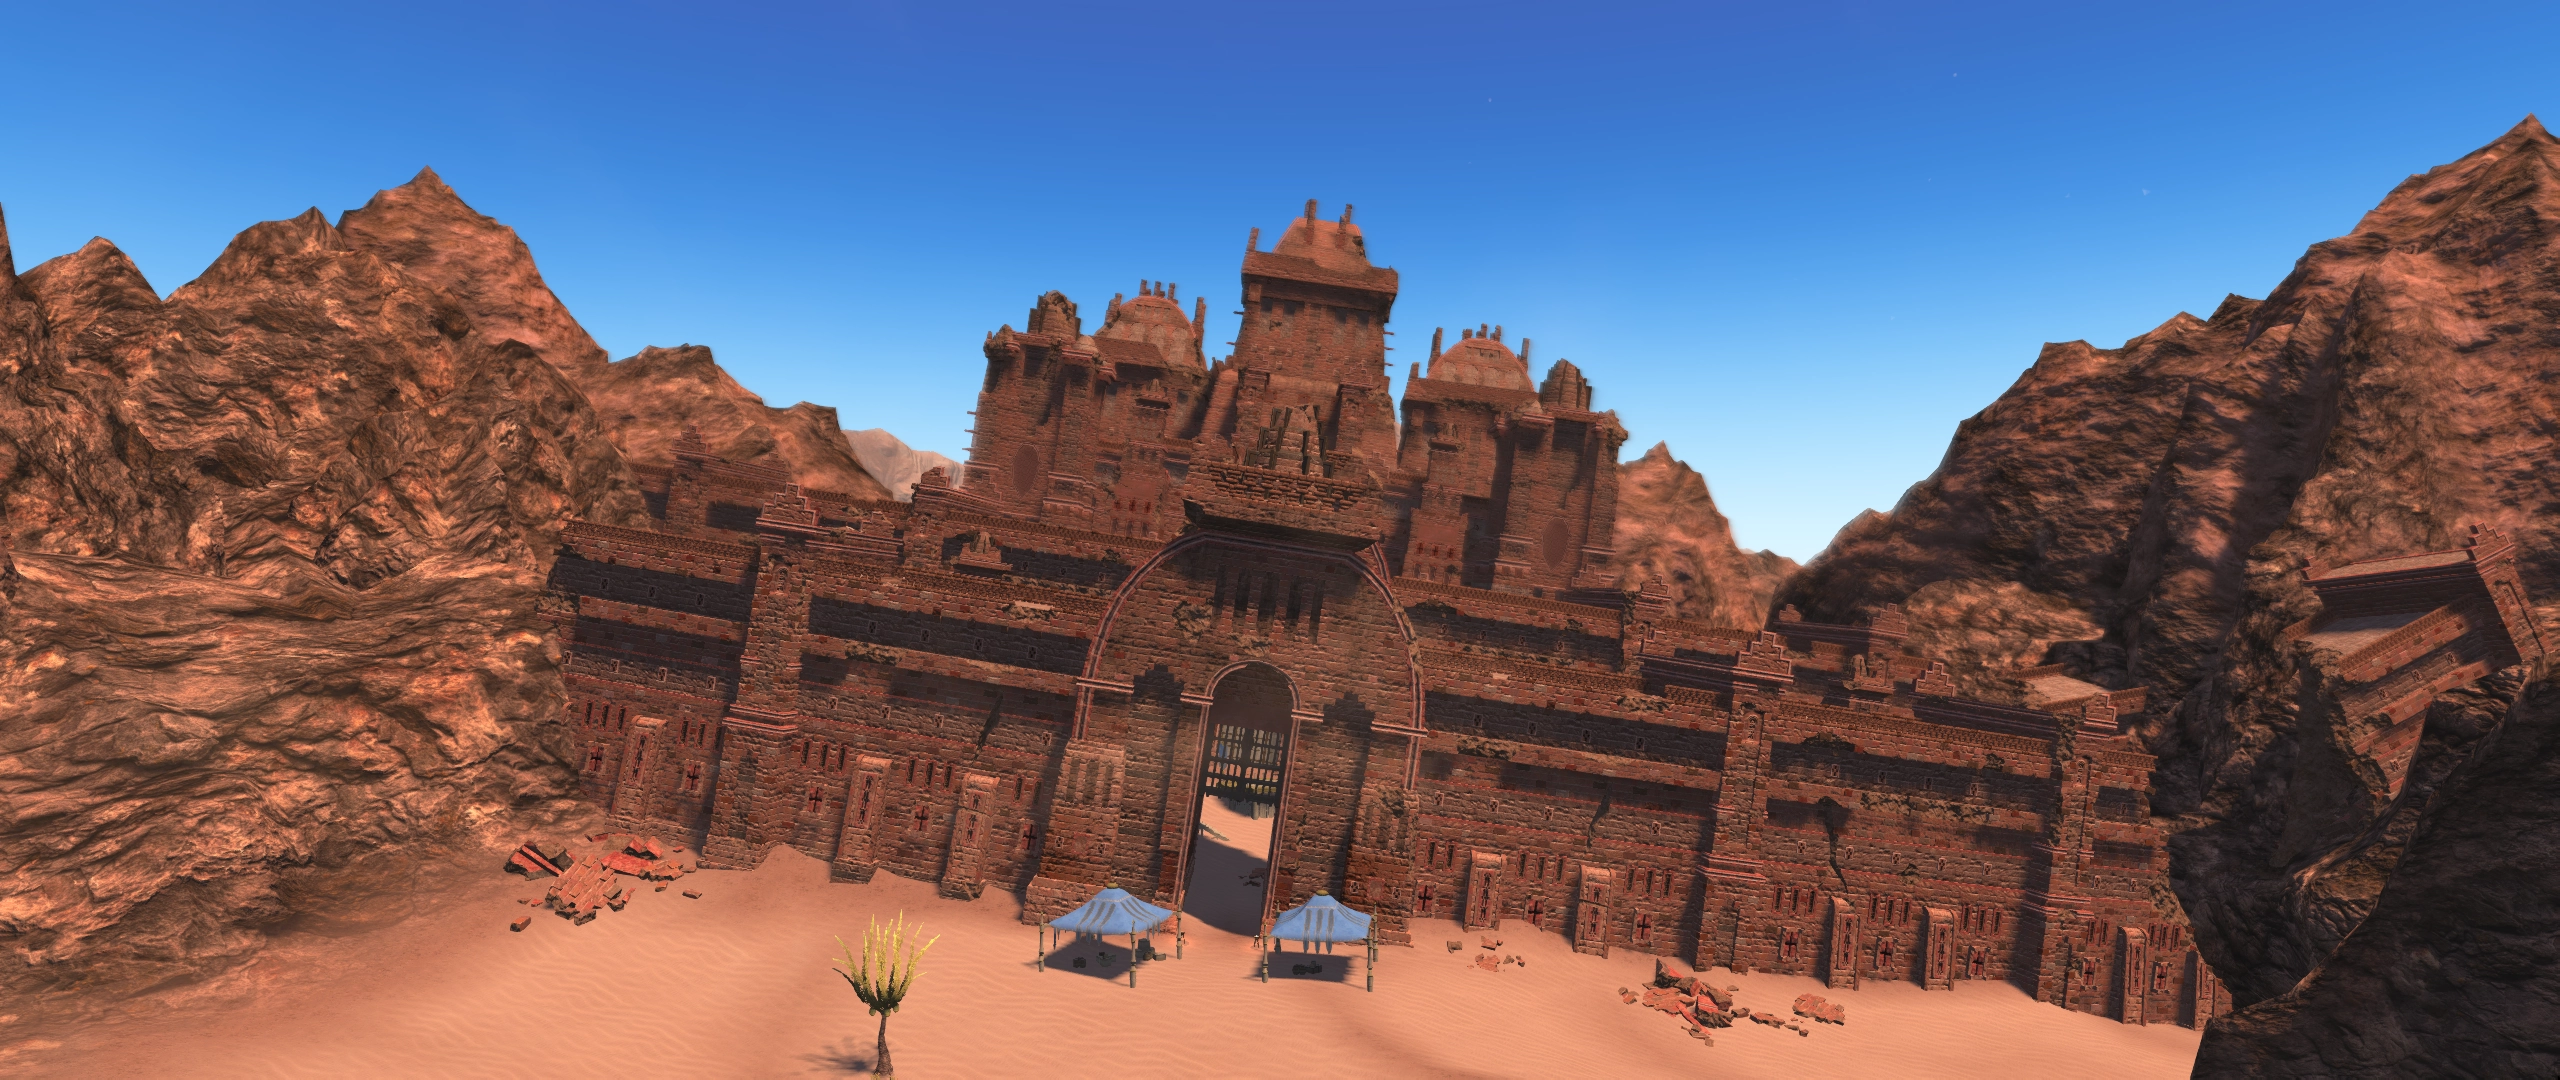 An angled ruined castle out in a desert.